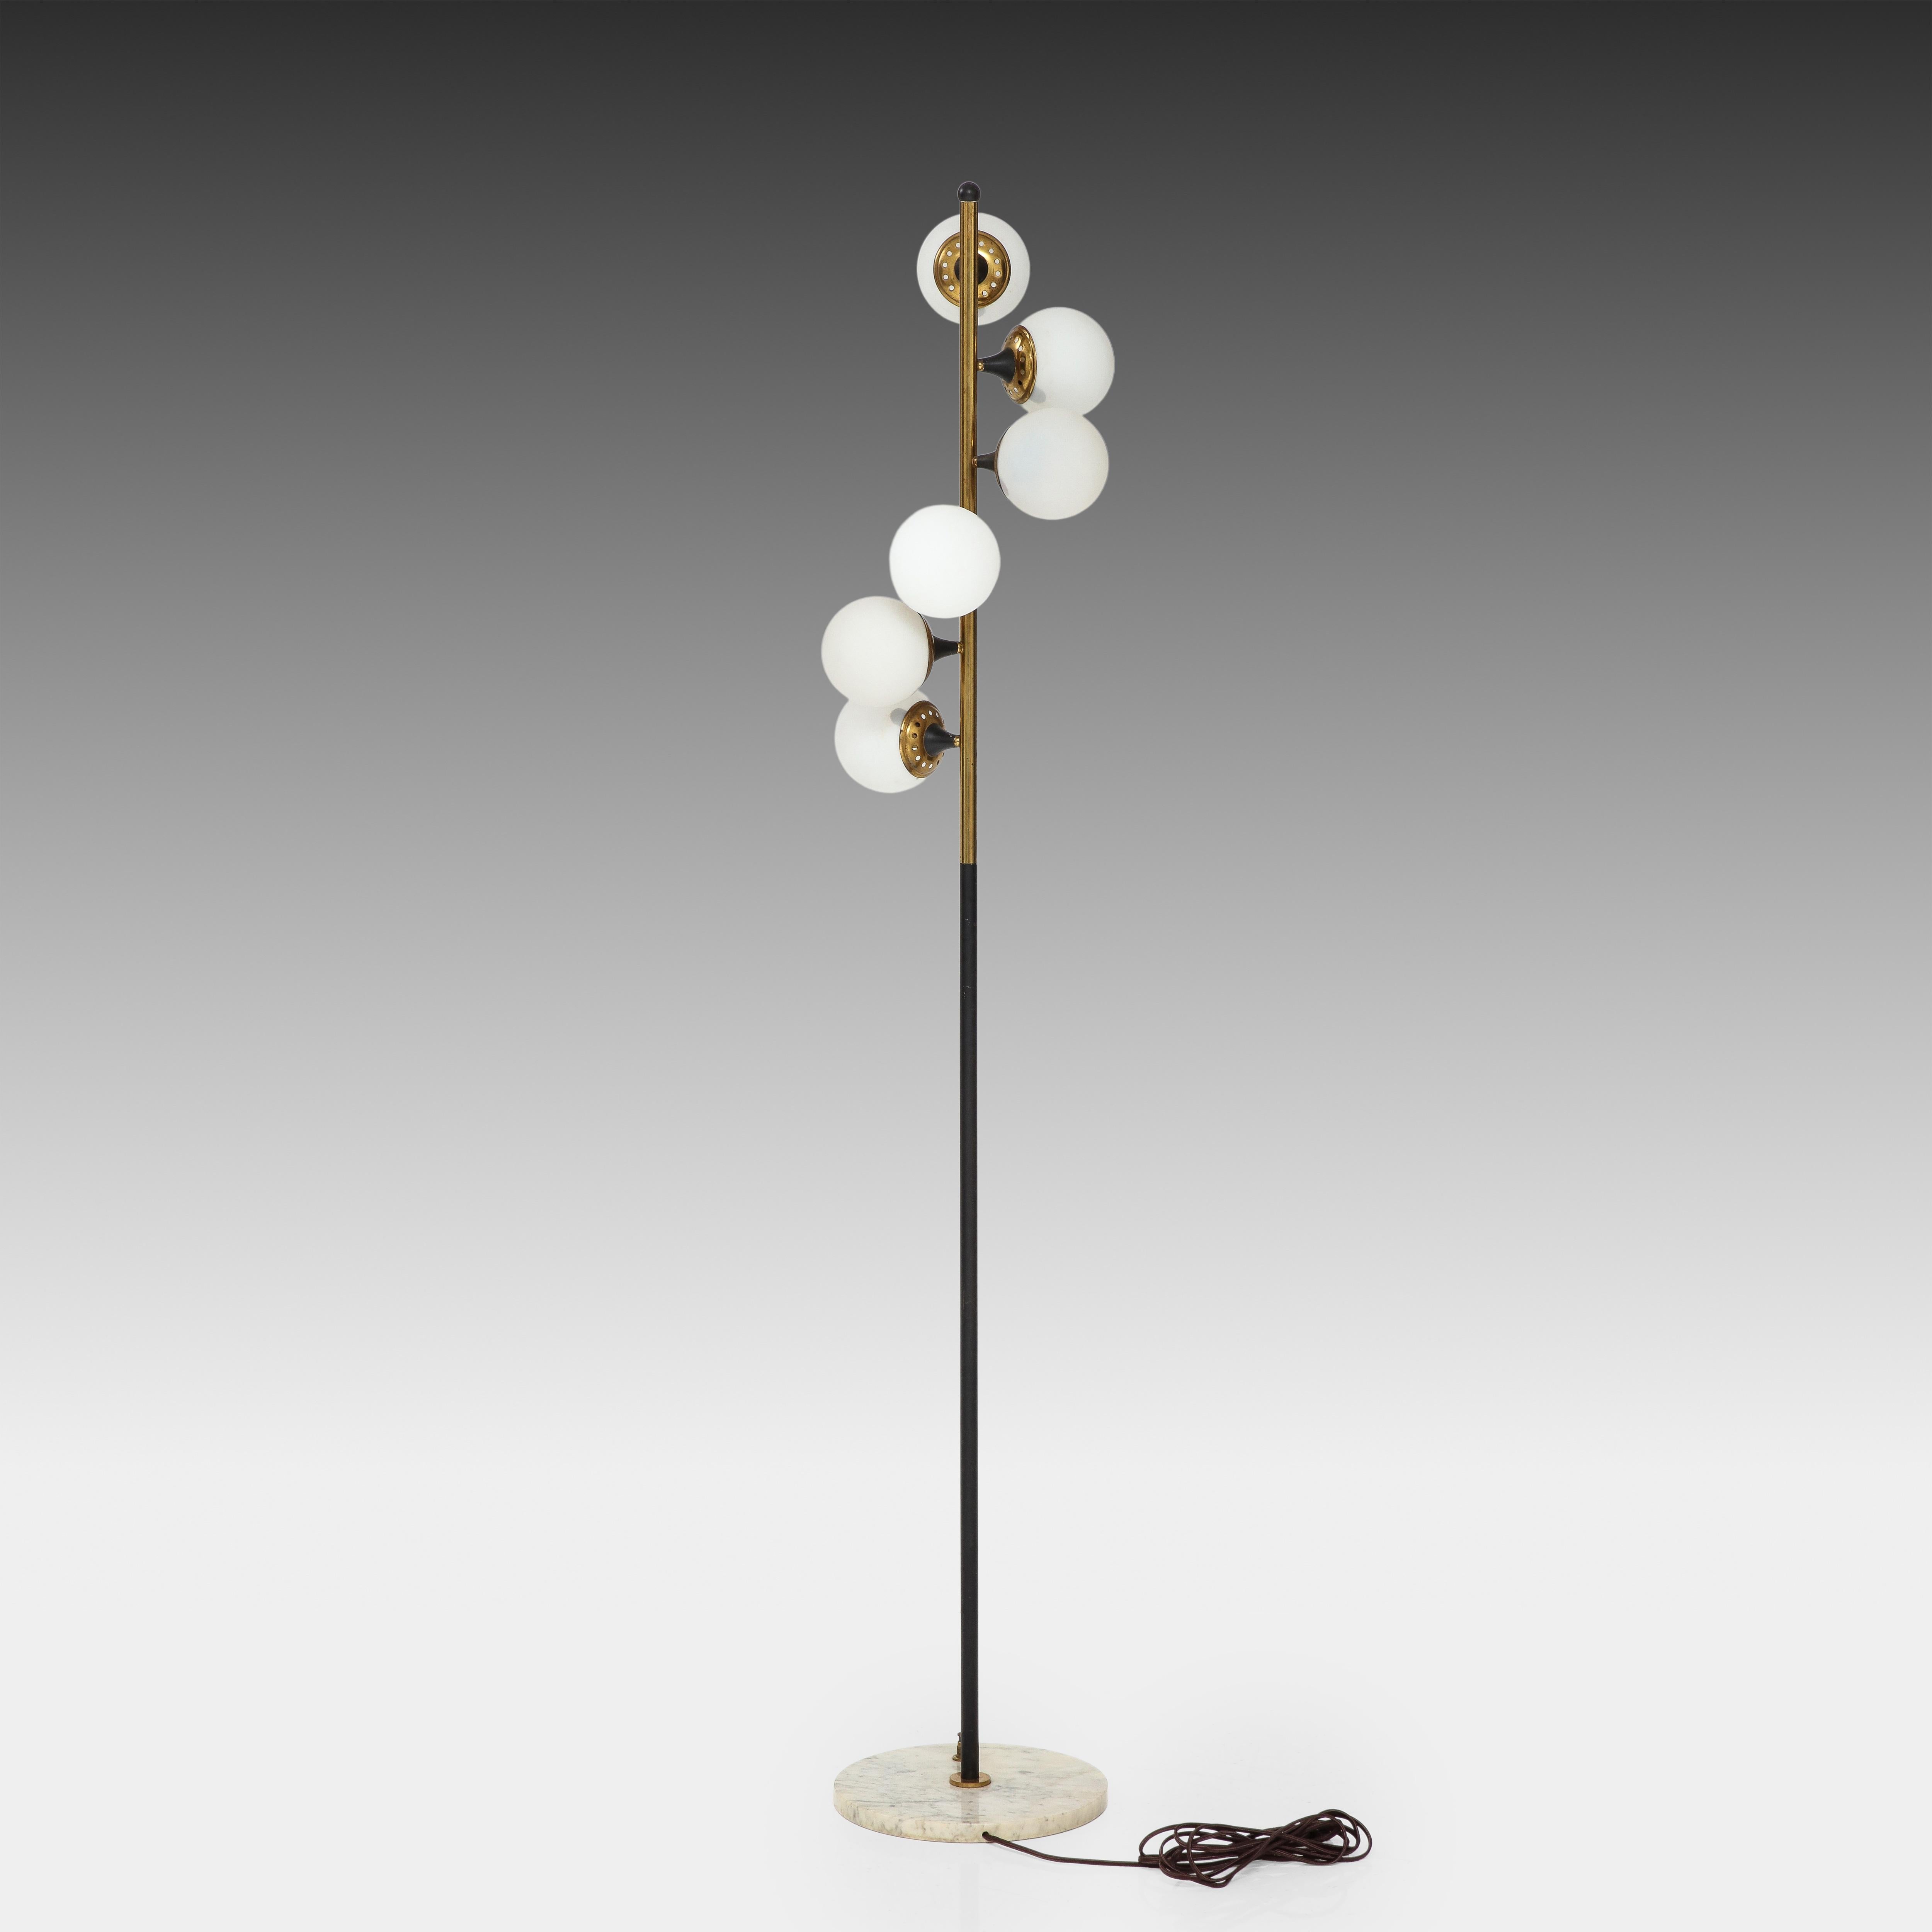 Stilnovo floor lamp composed of six frosted opaline glass balls cascading down gilt lacquered brass and black enameled metal stem on white marble base with original foot switch. Beautiful and iconic 1950s Stilnovo design with contrasting colors of